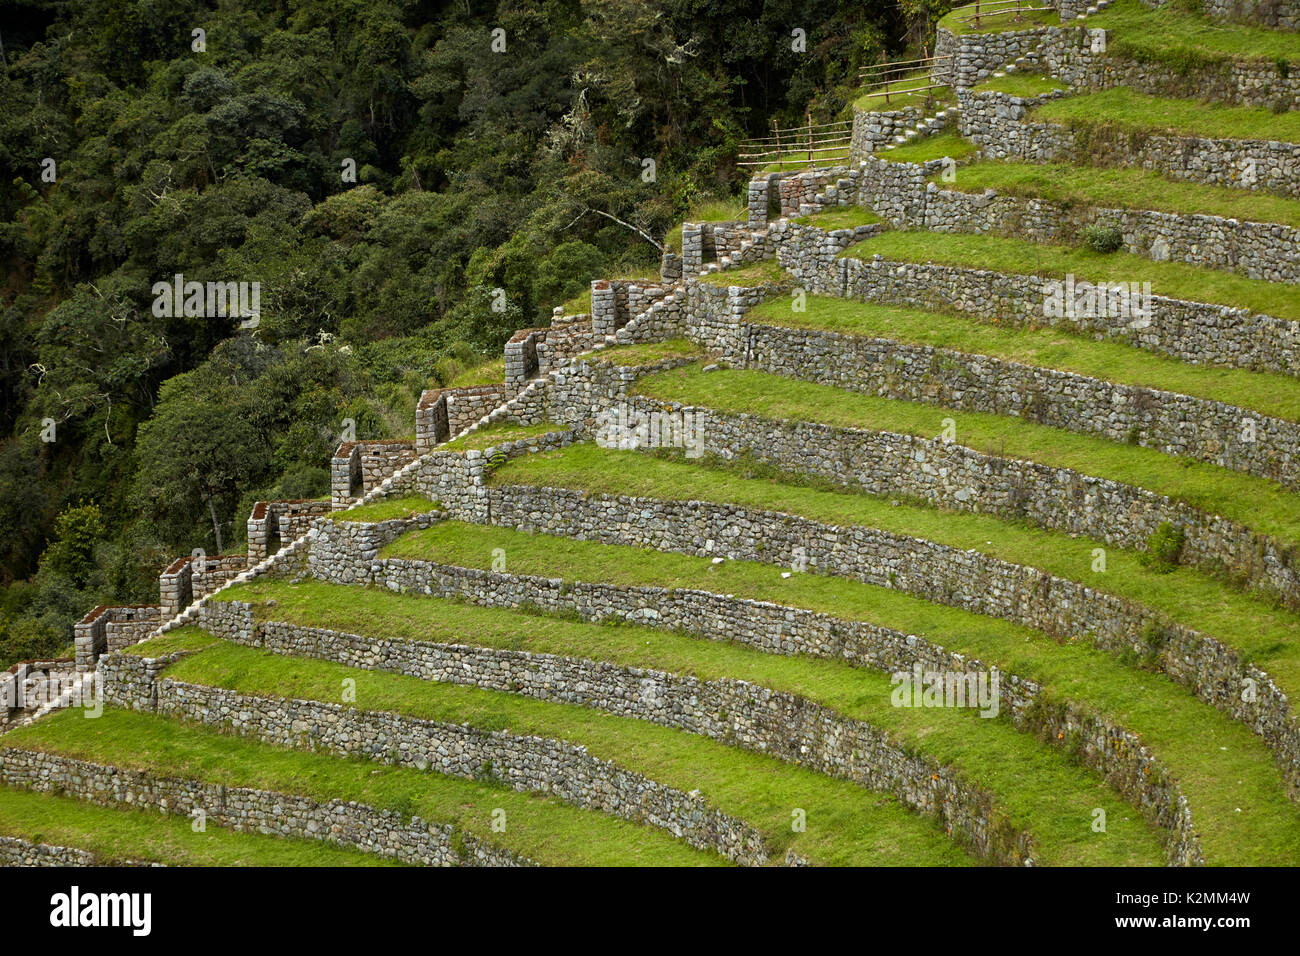 Agricultural terraces at the Inca city of Winay Wayna, on the Inca Trail to Machu Picchu, Peru, South America Stock Photo